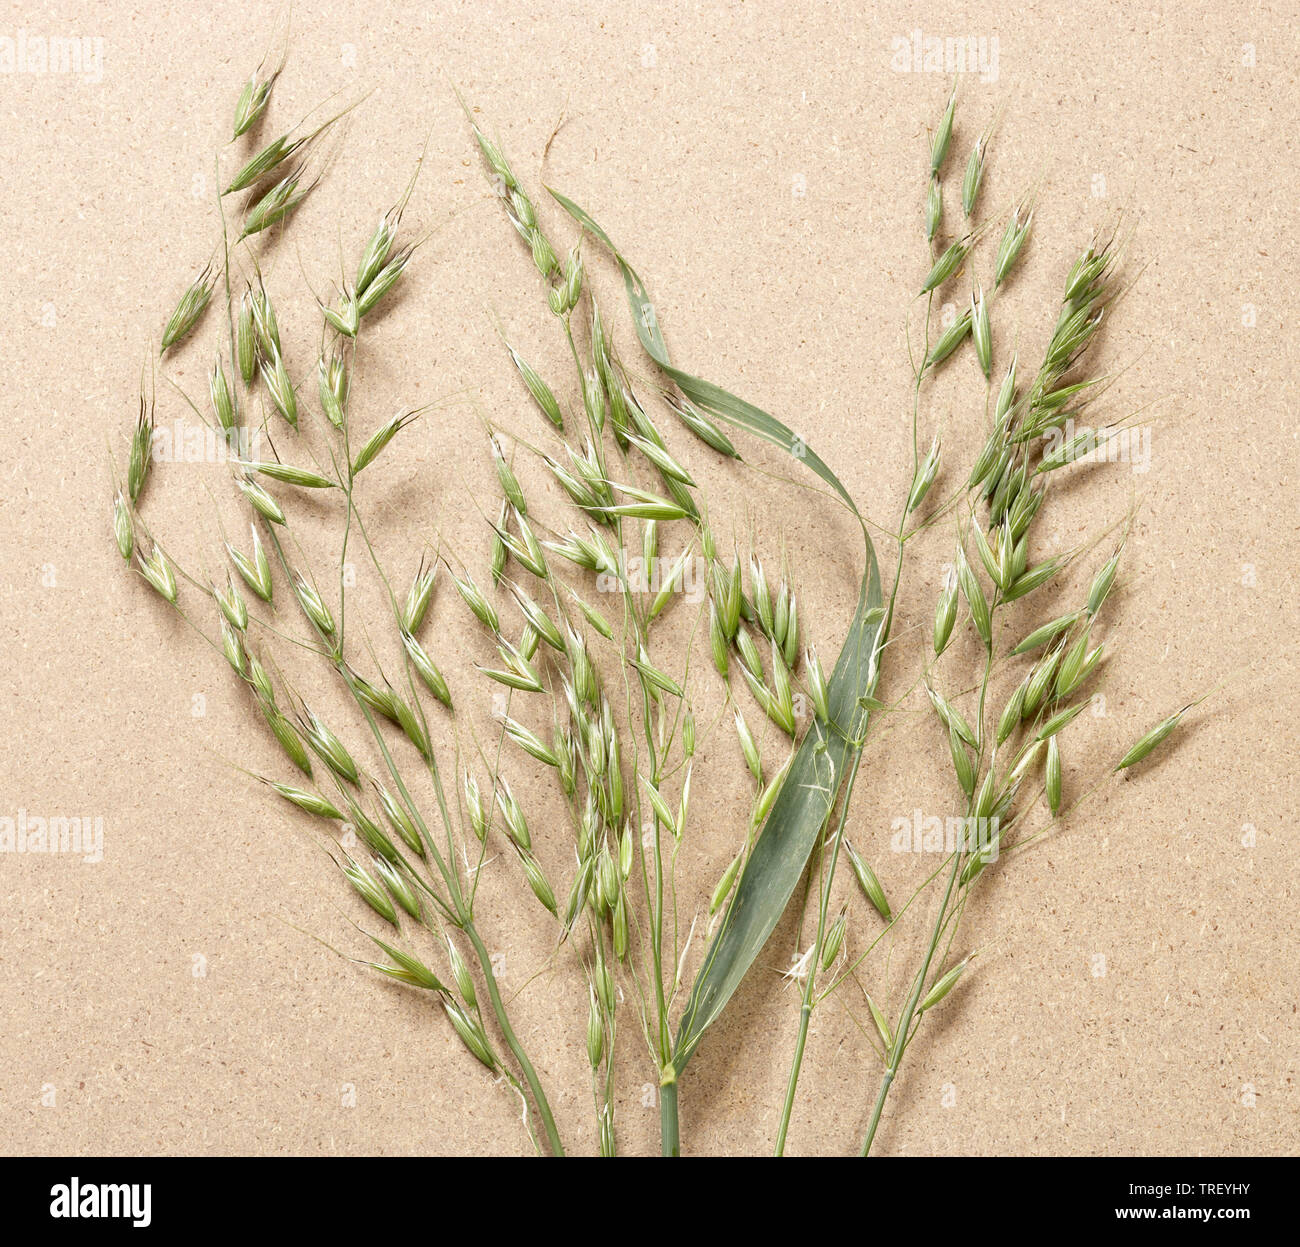 Oats (Avena sativa), panicles, studio picture against a white background Stock Photo